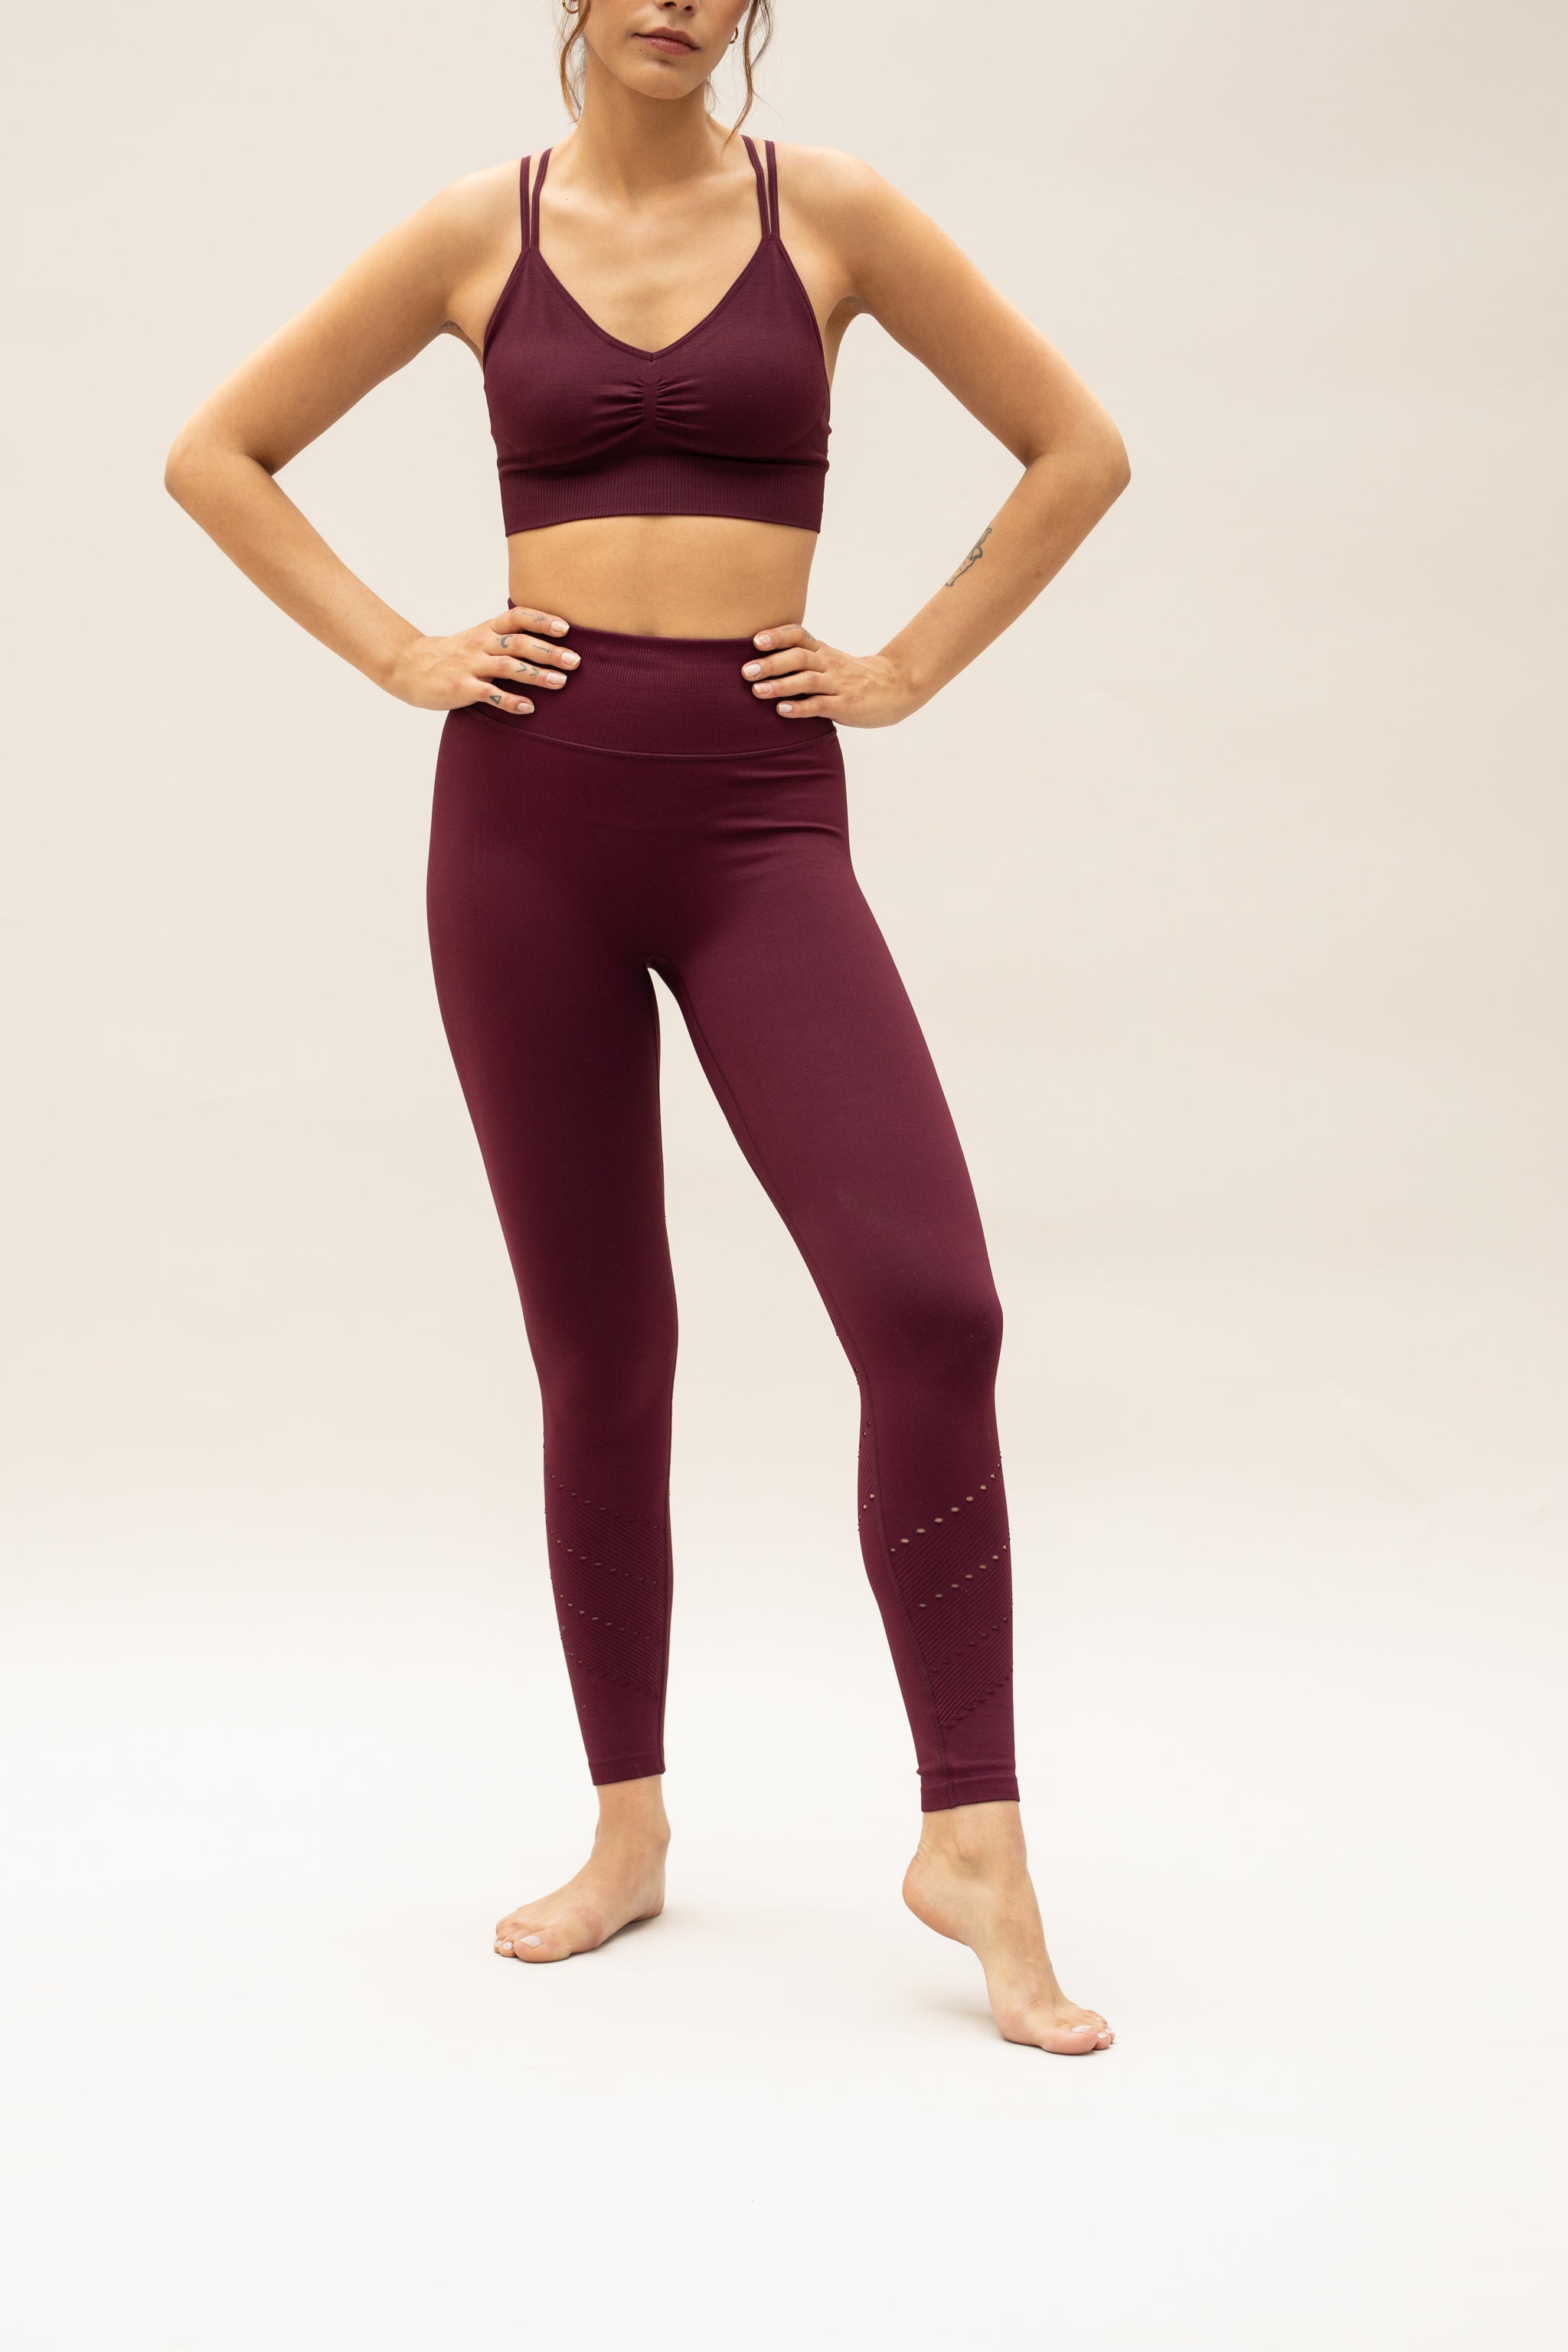 Adidas Women's Brand Love Tights | Women's Active Leggings & Tights |  Women's - Shop Your Navy Exchange - Official Site